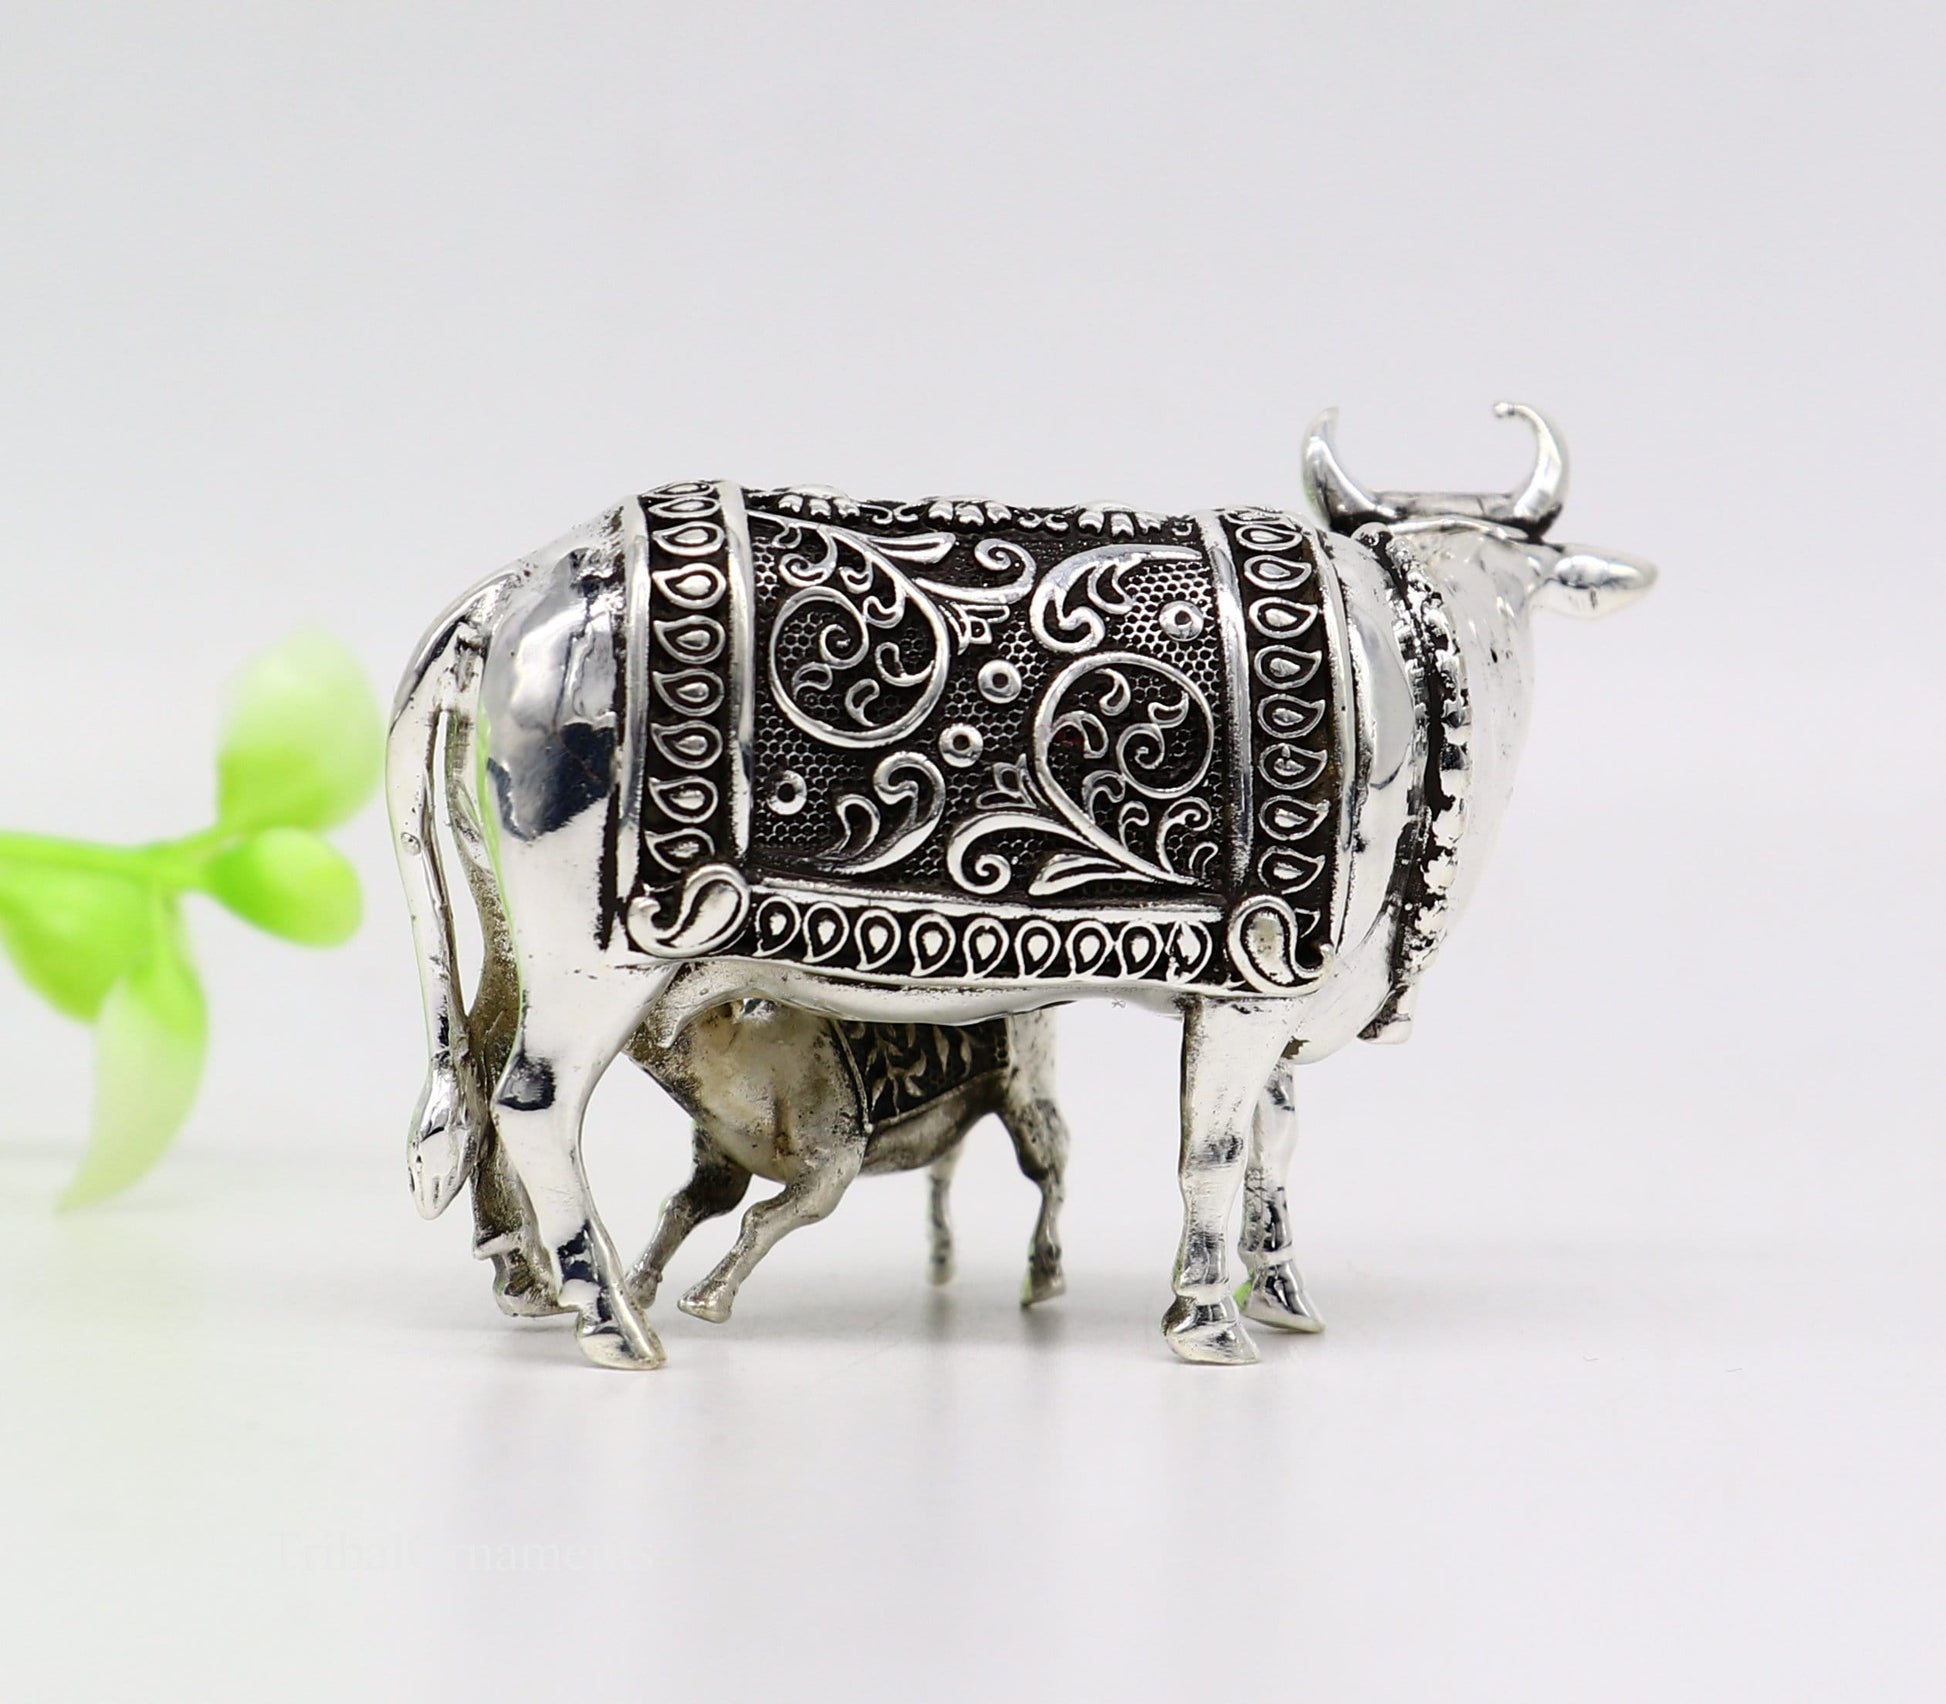 Divine cow with calf 925 sterling silver vintage Nakshi work design Kamdhenu cow, deity's cow, wishing cow, silver worshipping puja stb120 - TRIBAL ORNAMENTS